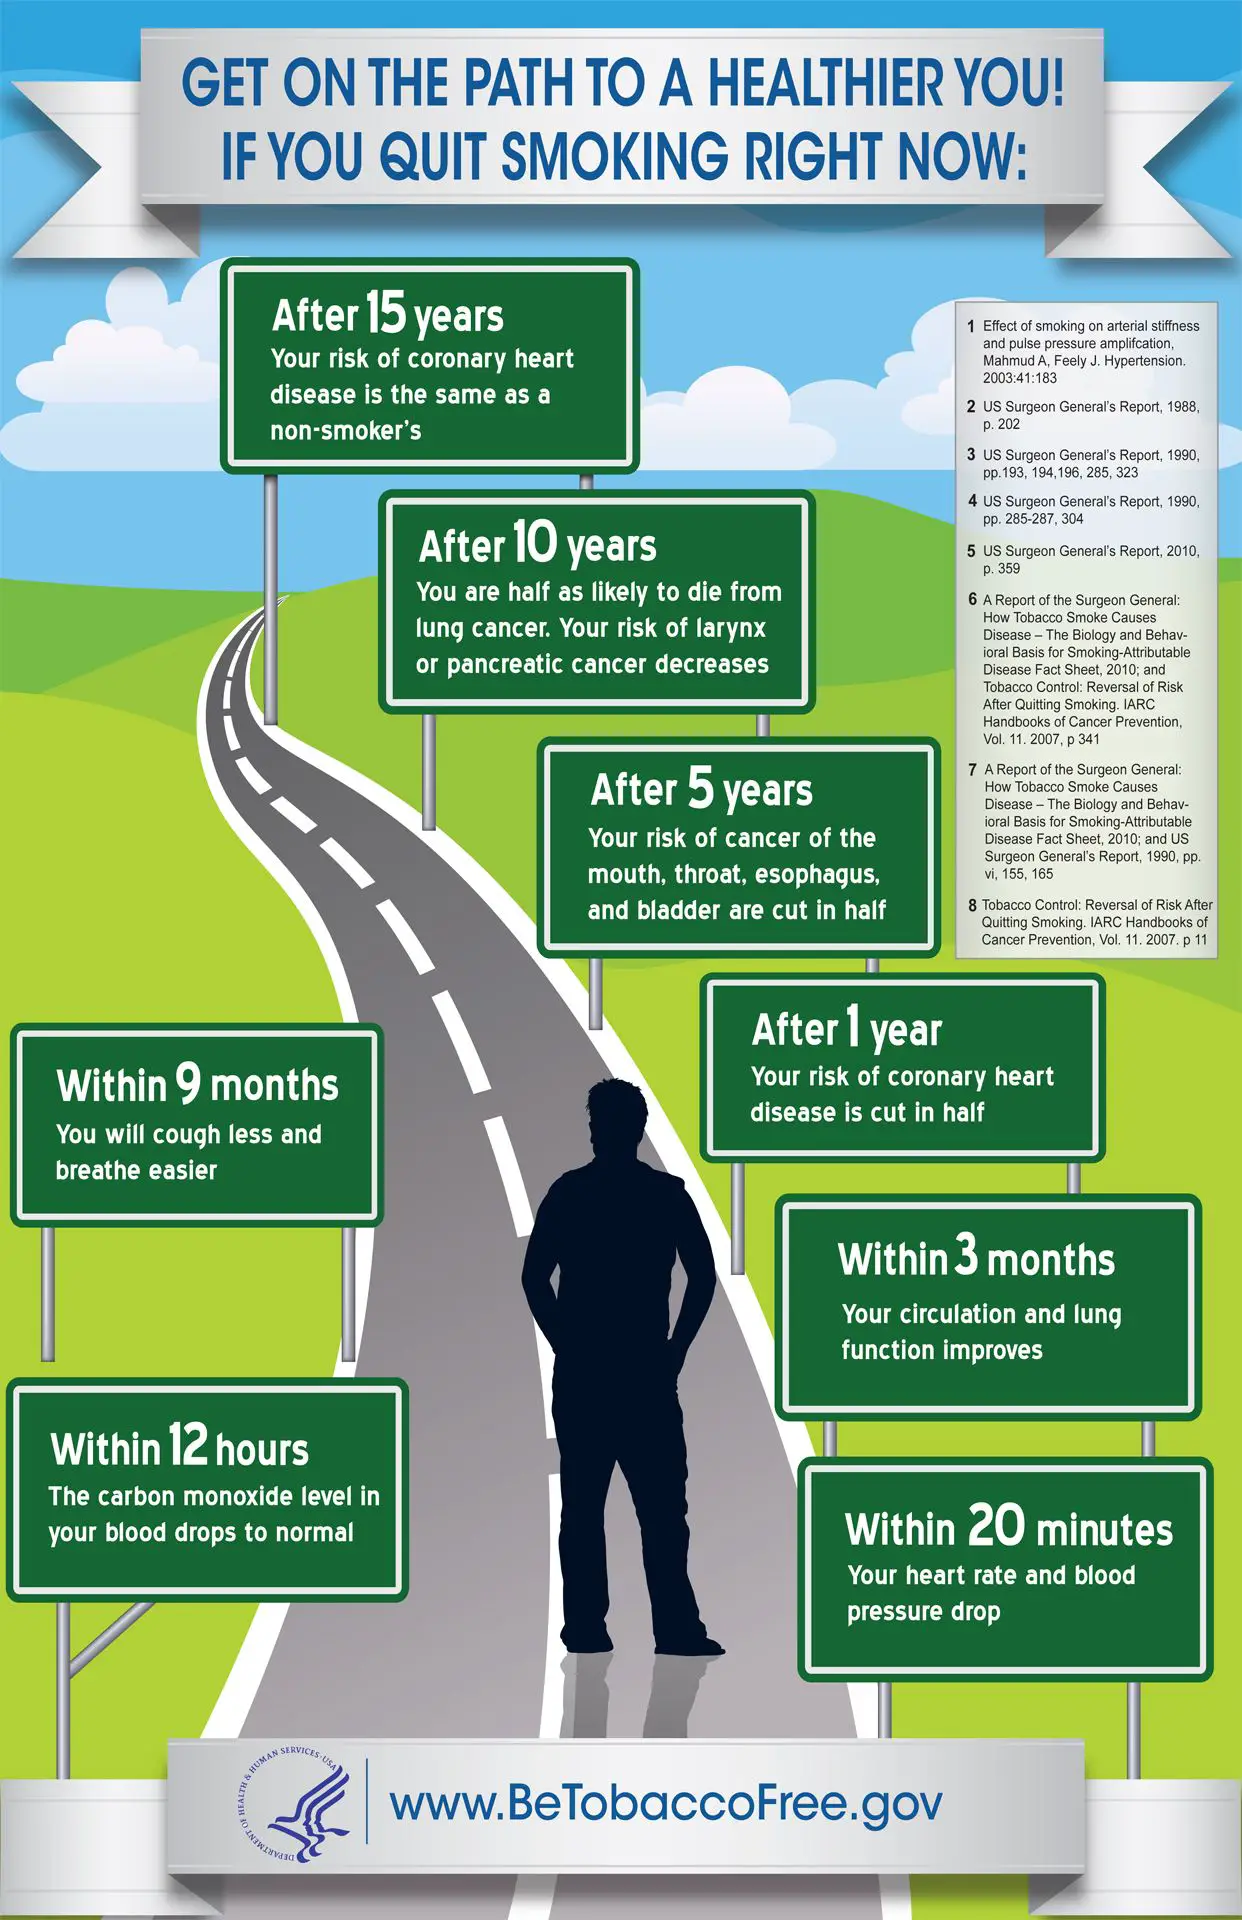 Did you know that within 20 minutes of quitting smoking your heart rate ...